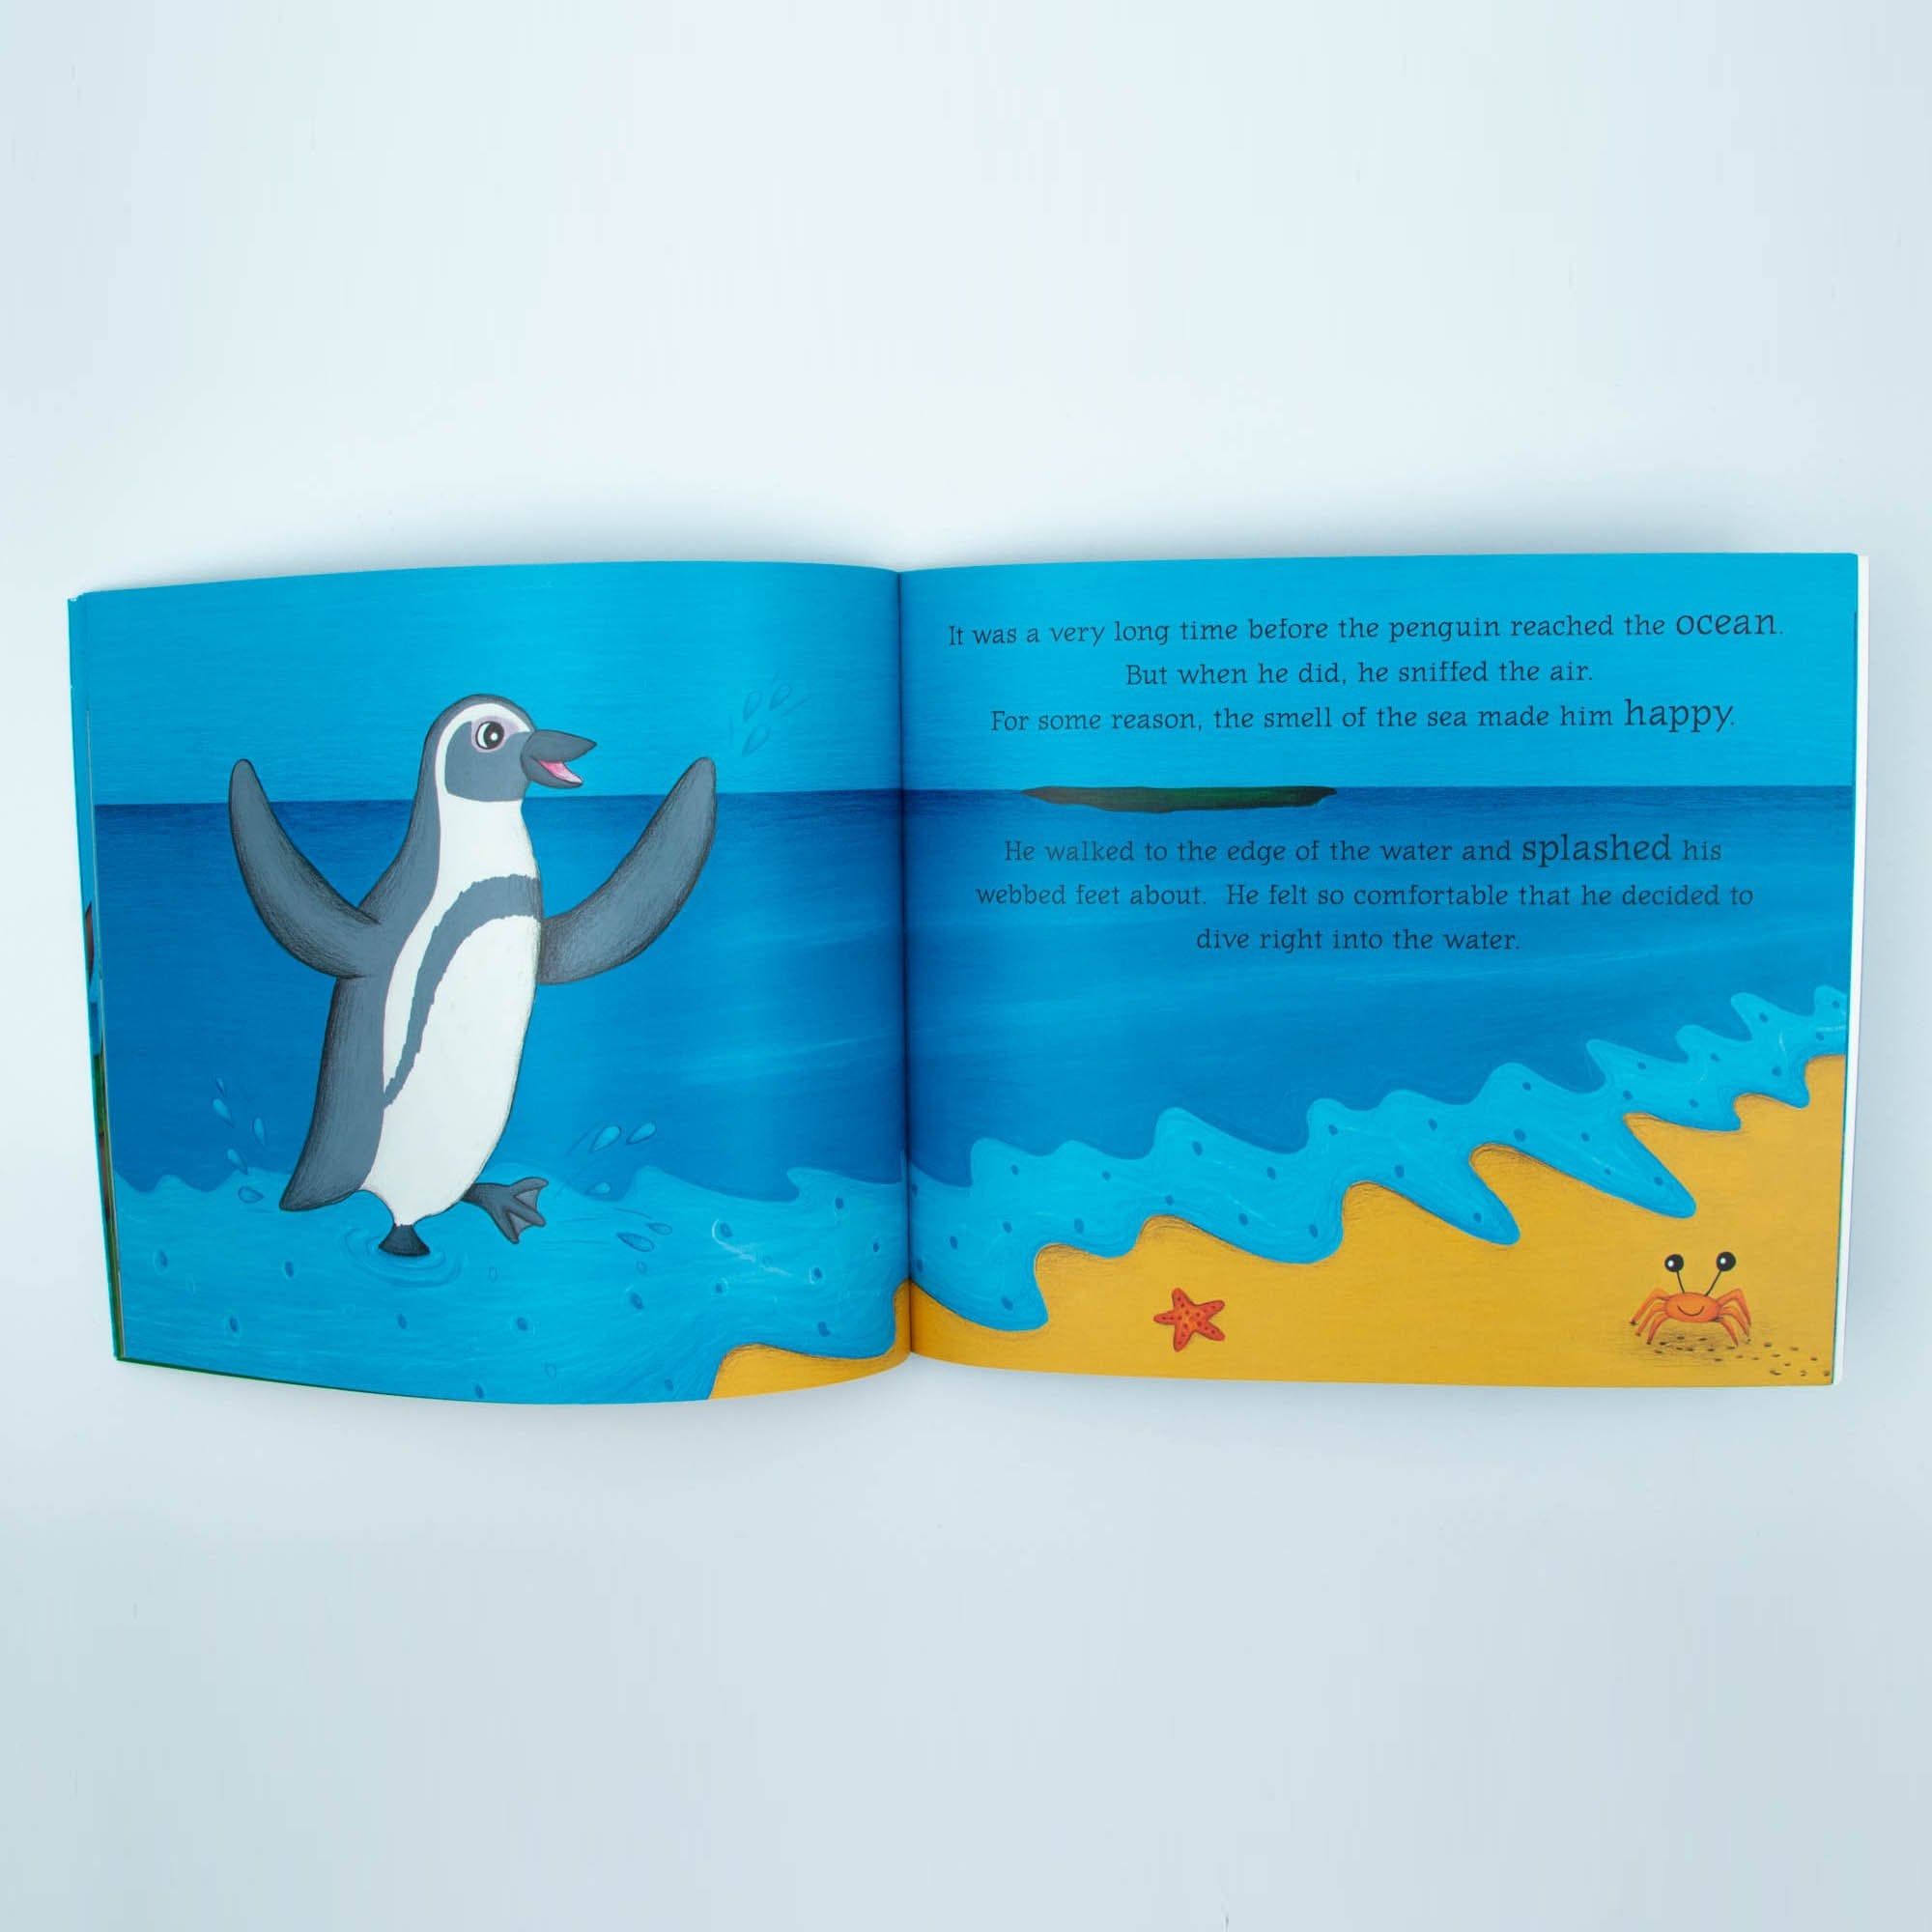 African Folklore Stories The Brave little Penguin English Story Book